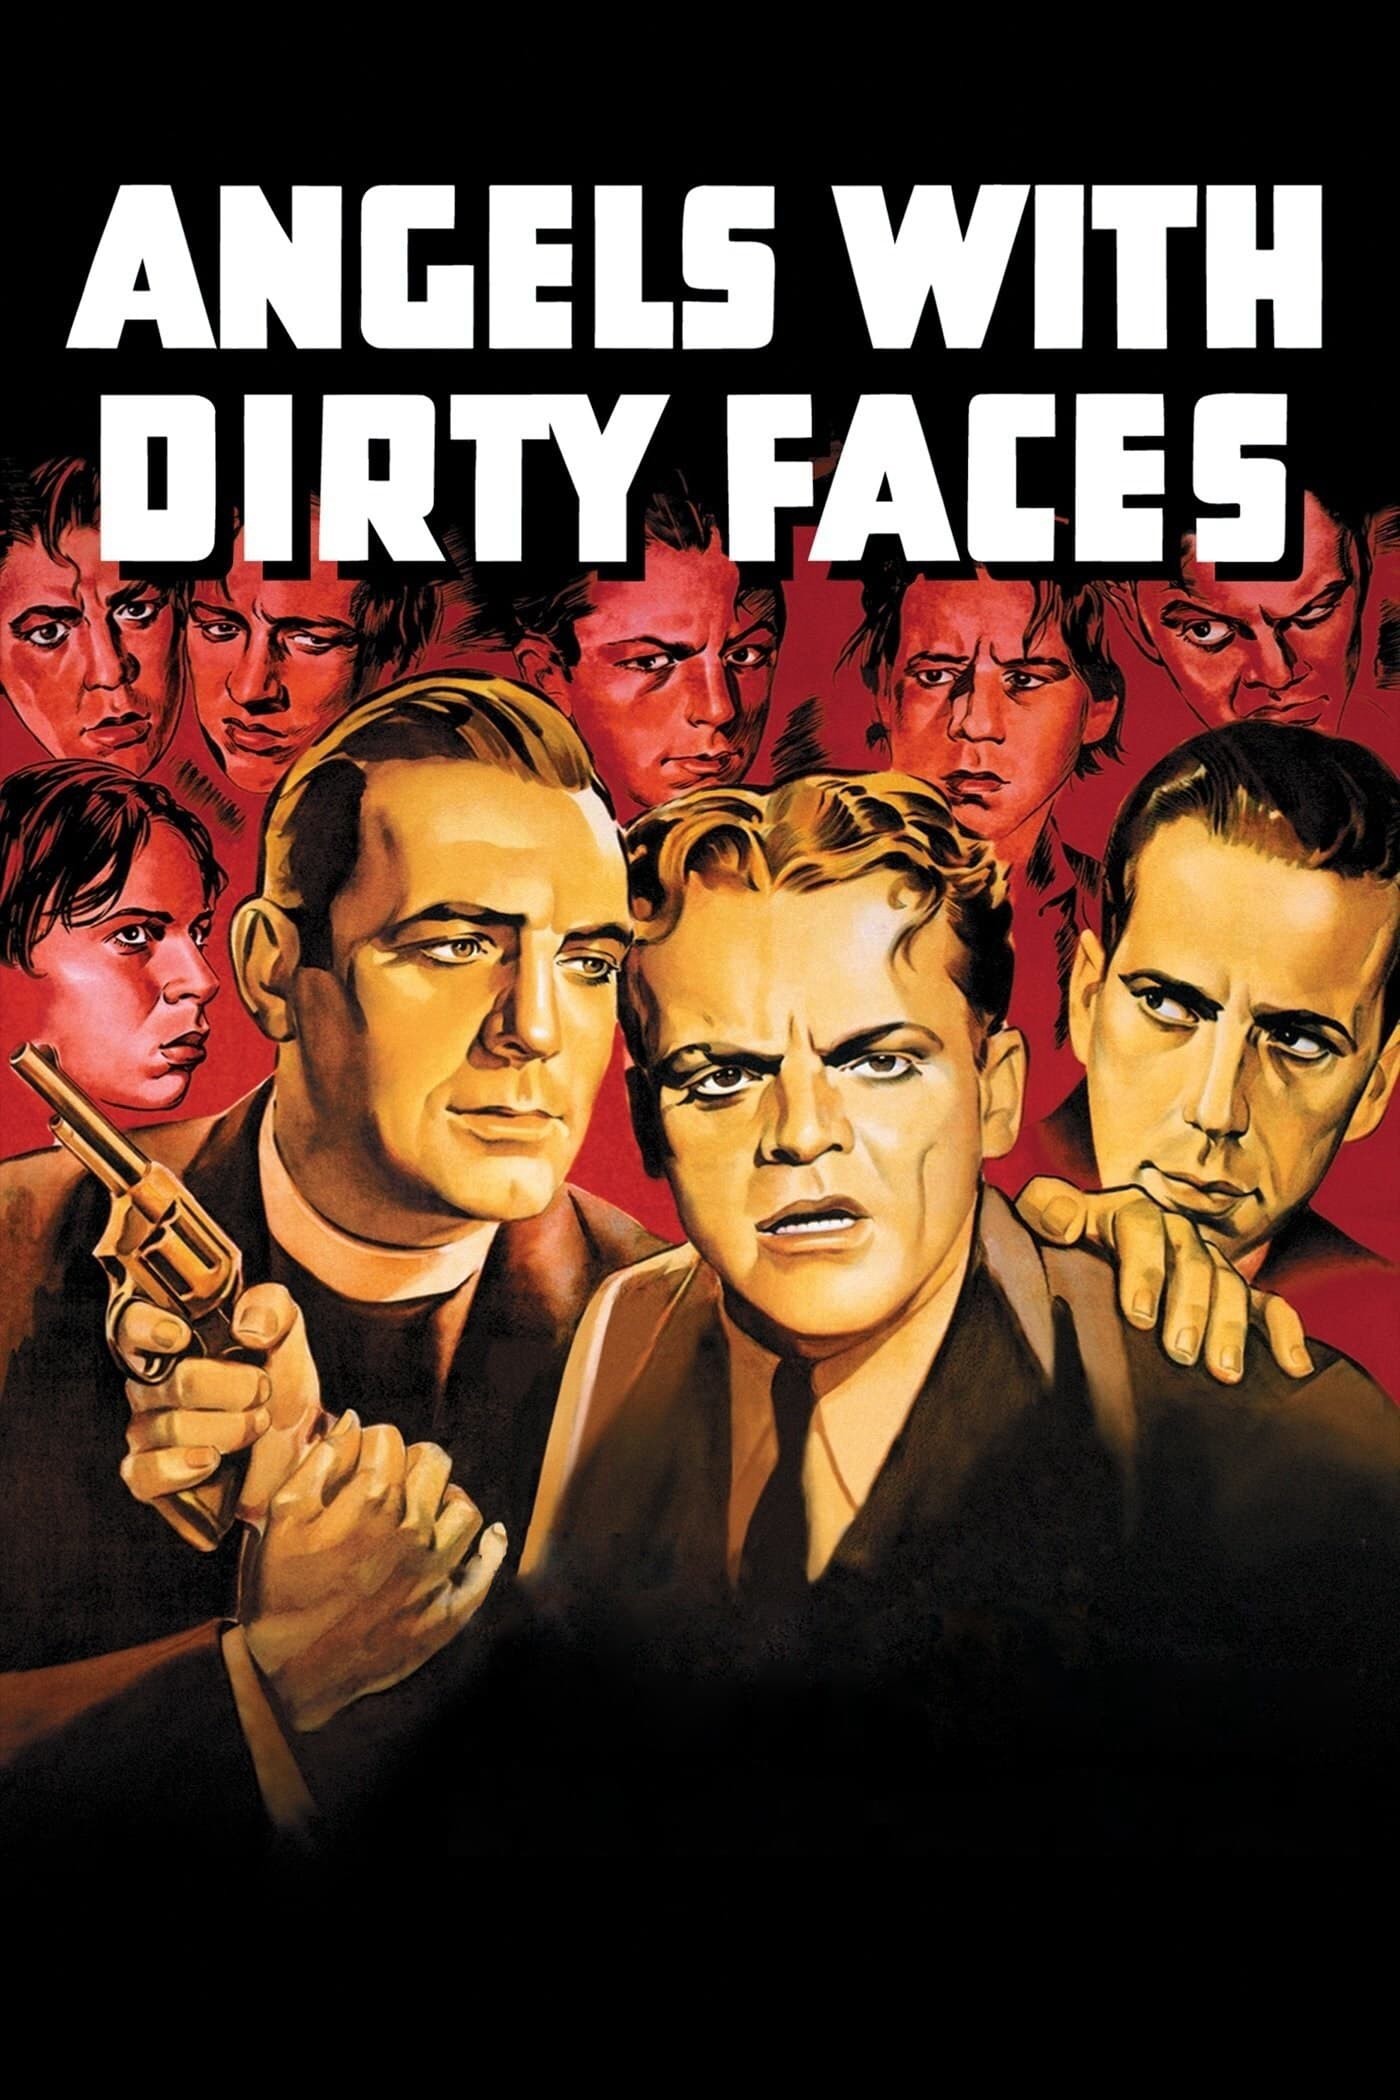 Angels with Dirty Faces 1938